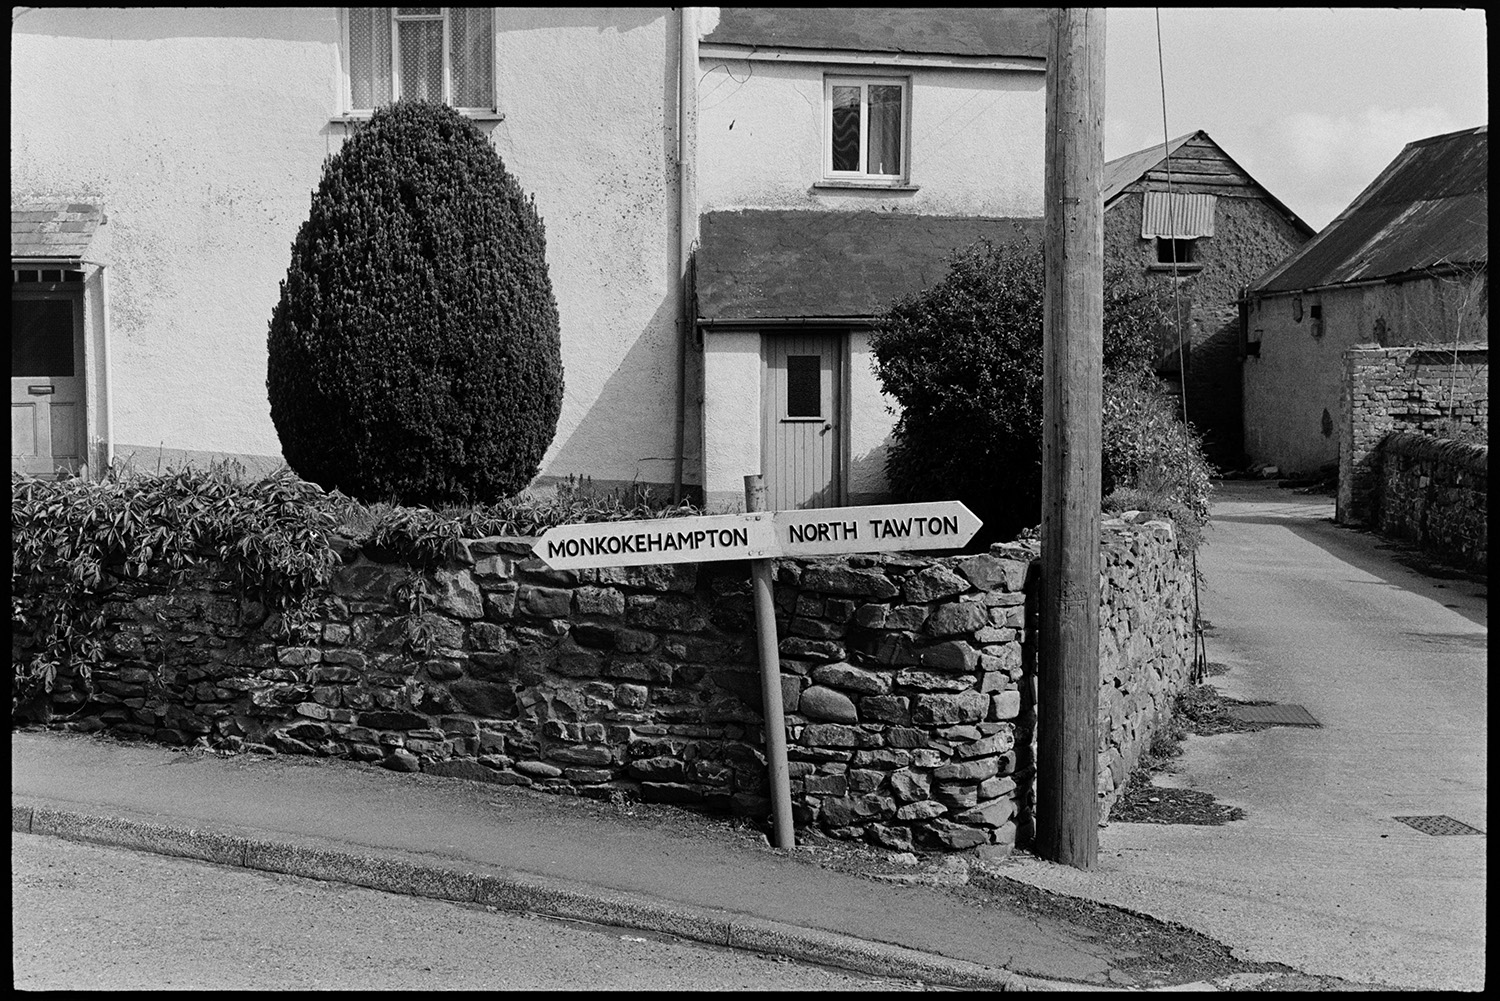 Road sign on corner of farm wall, new sign replacing nicer old one, see earlier pic?
[A new signpost at Exbourne by a farm garden wall pointing the way to Monkokehampton and North Tawton. Barns can be seen in the background.]